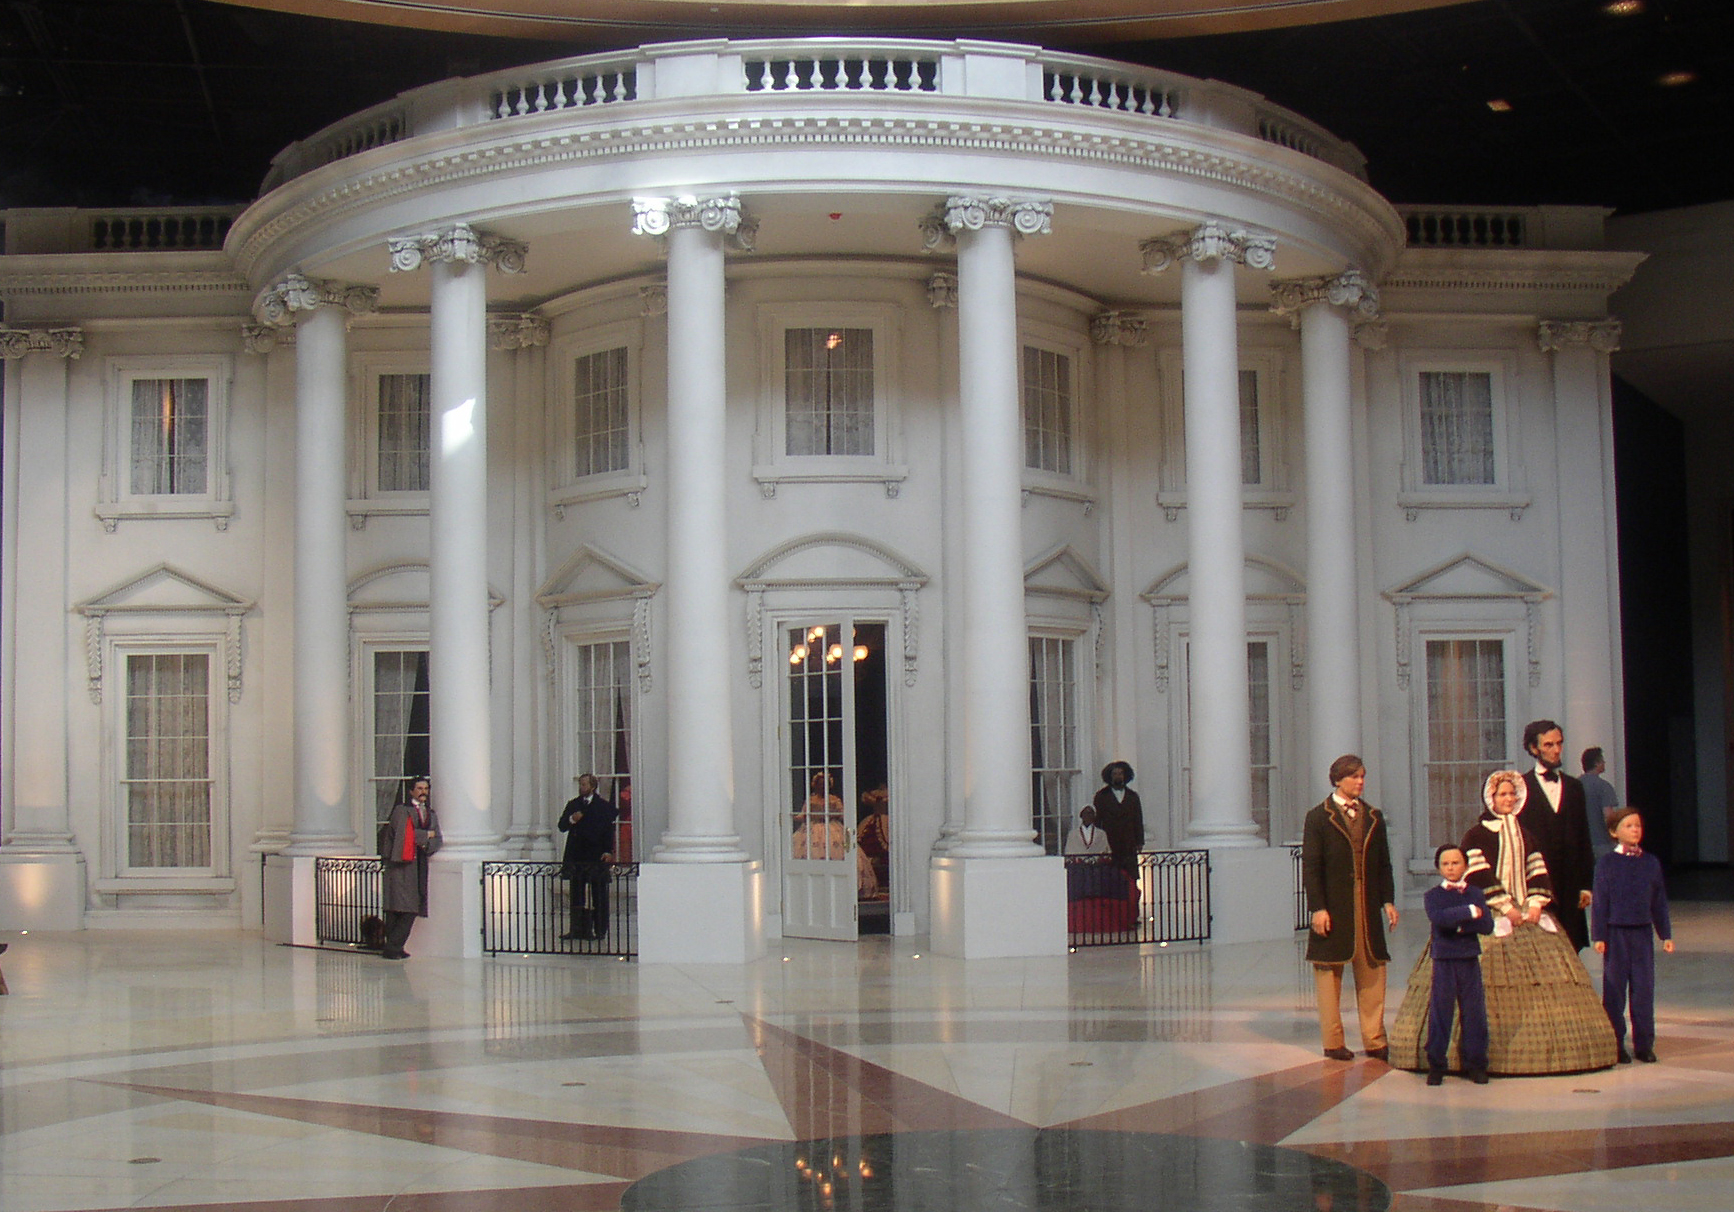 The Abraham Lincoln Presidential Library and Museum